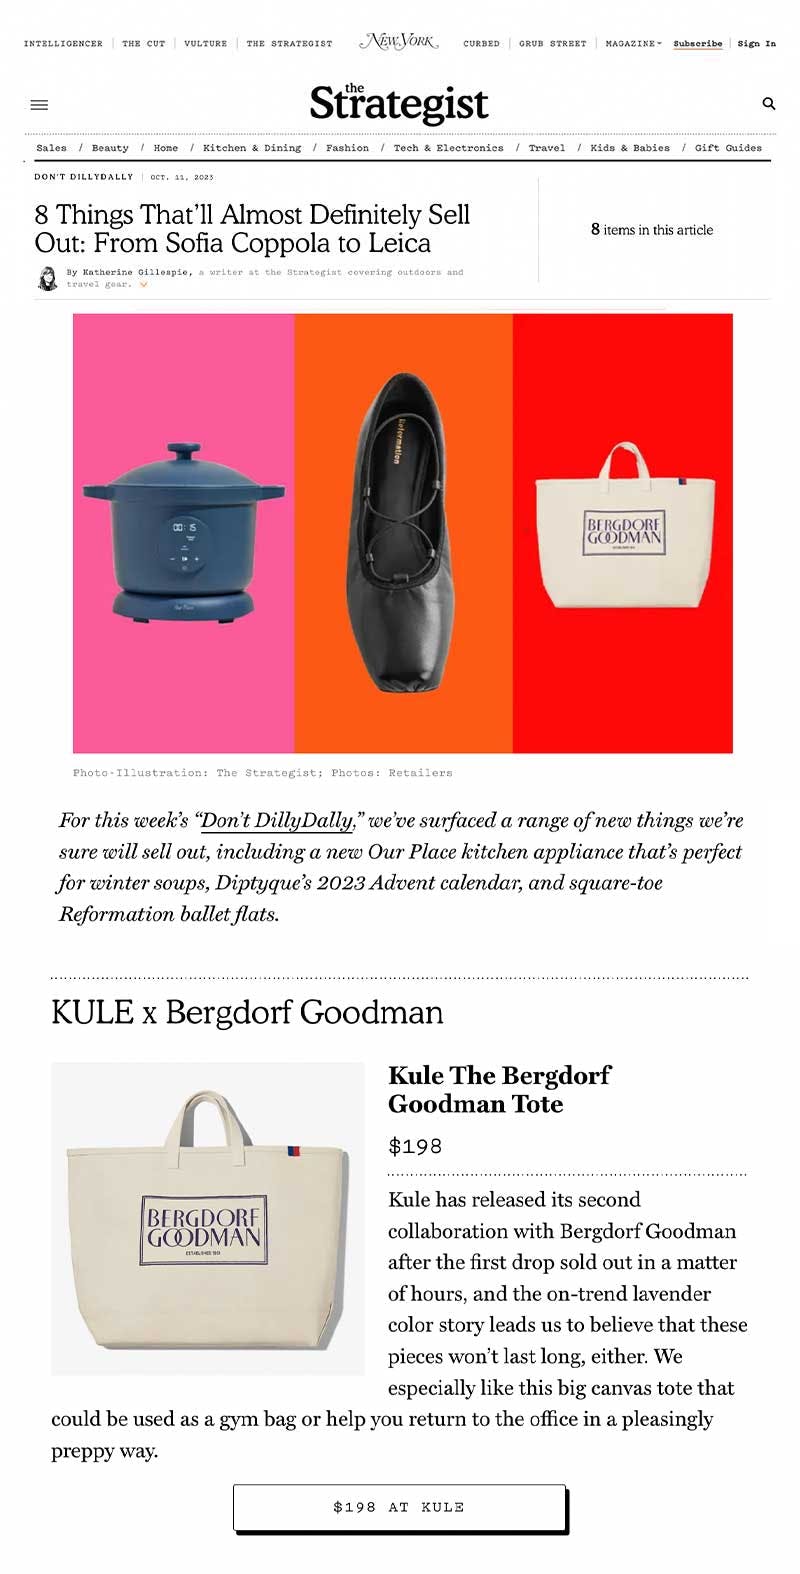 The Strategist featuring KULE x Bergdorf Goodman collaboration